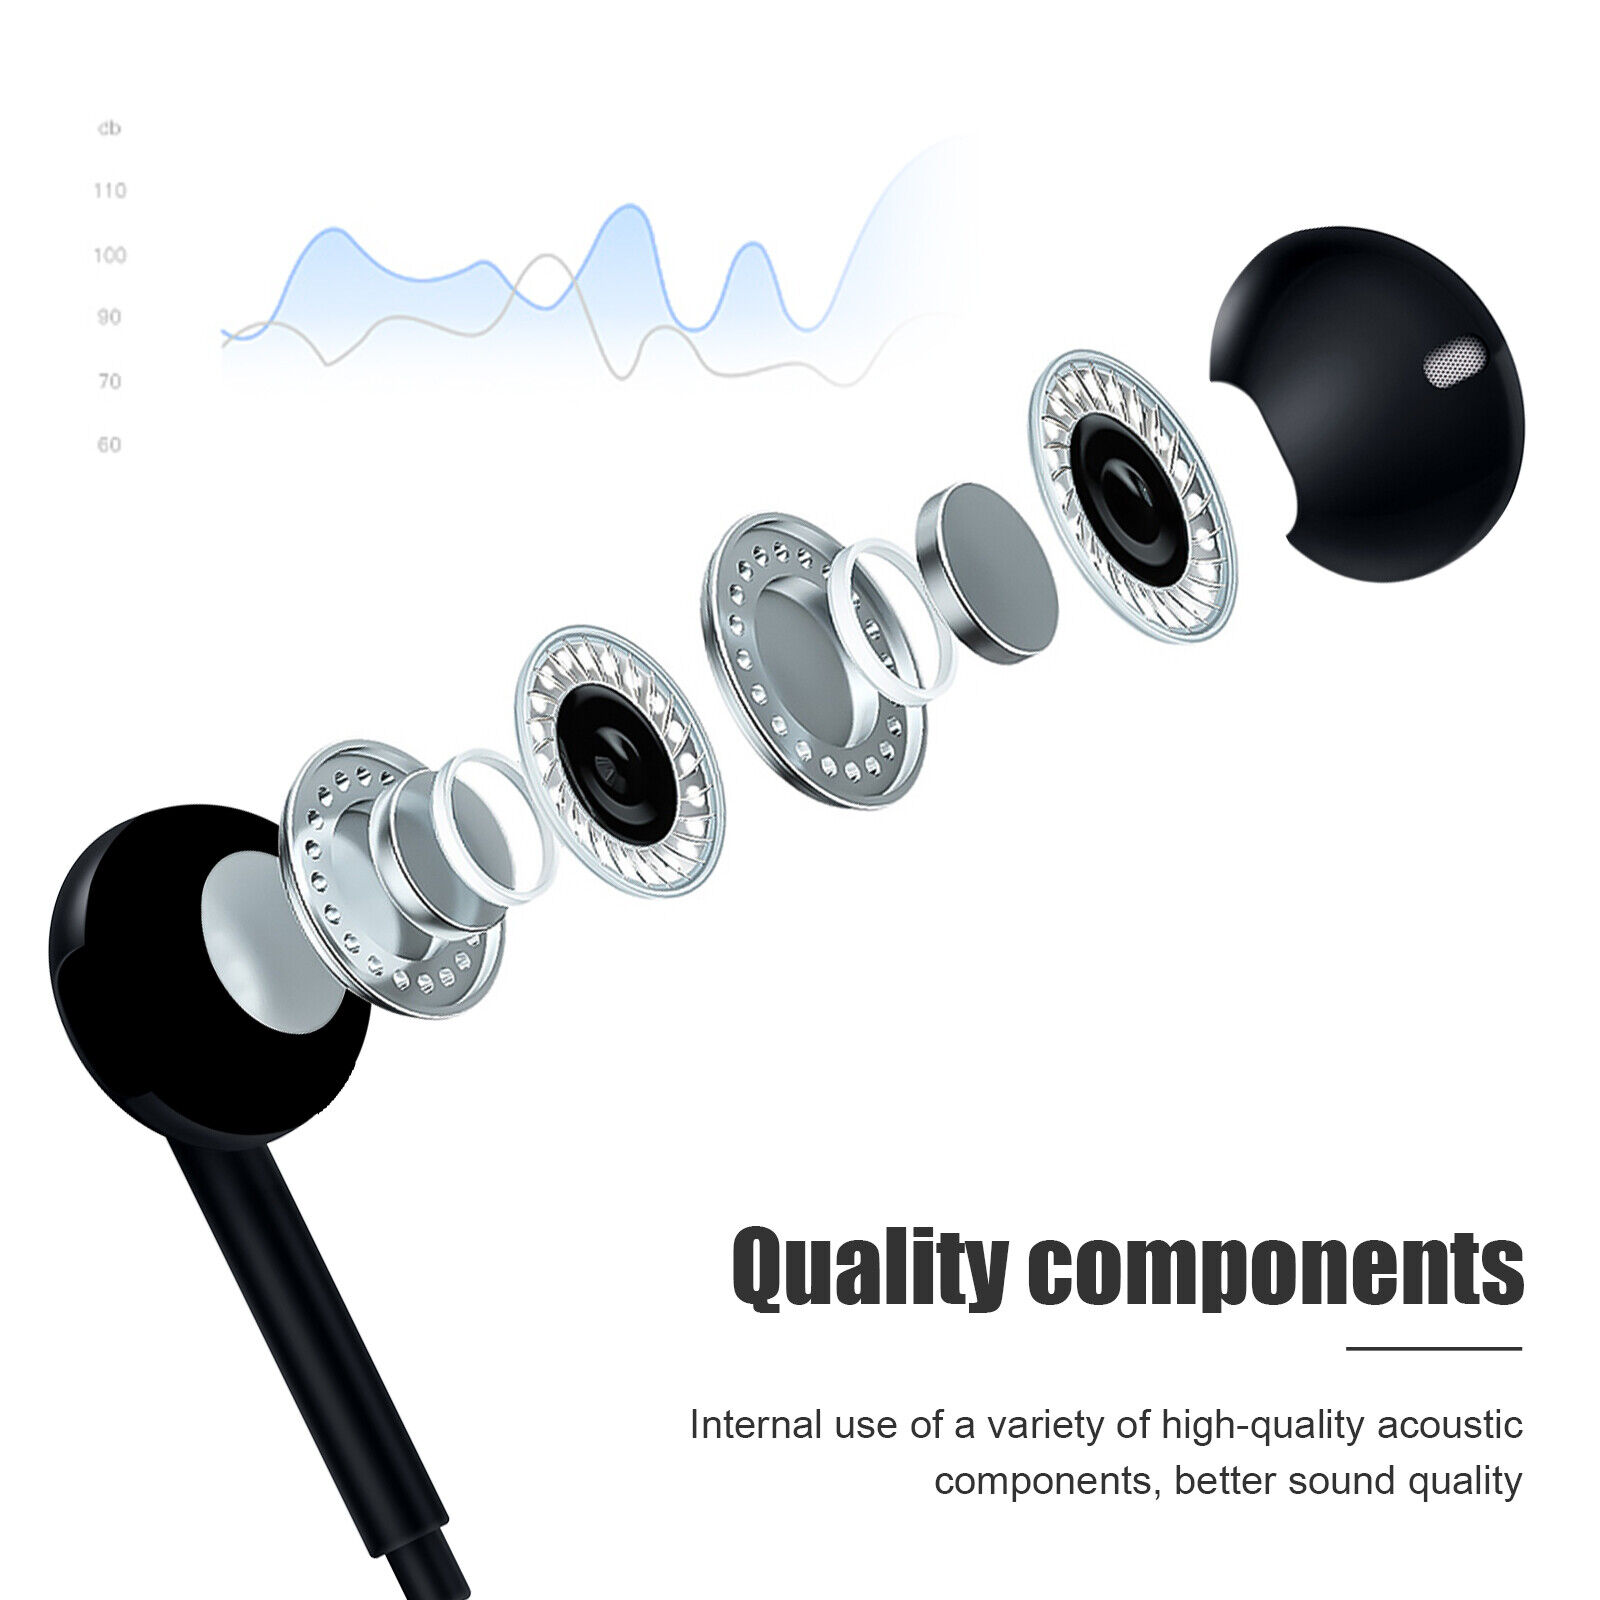 Bulk 3.5mm Earbuds with Mic for Apple/Samsung